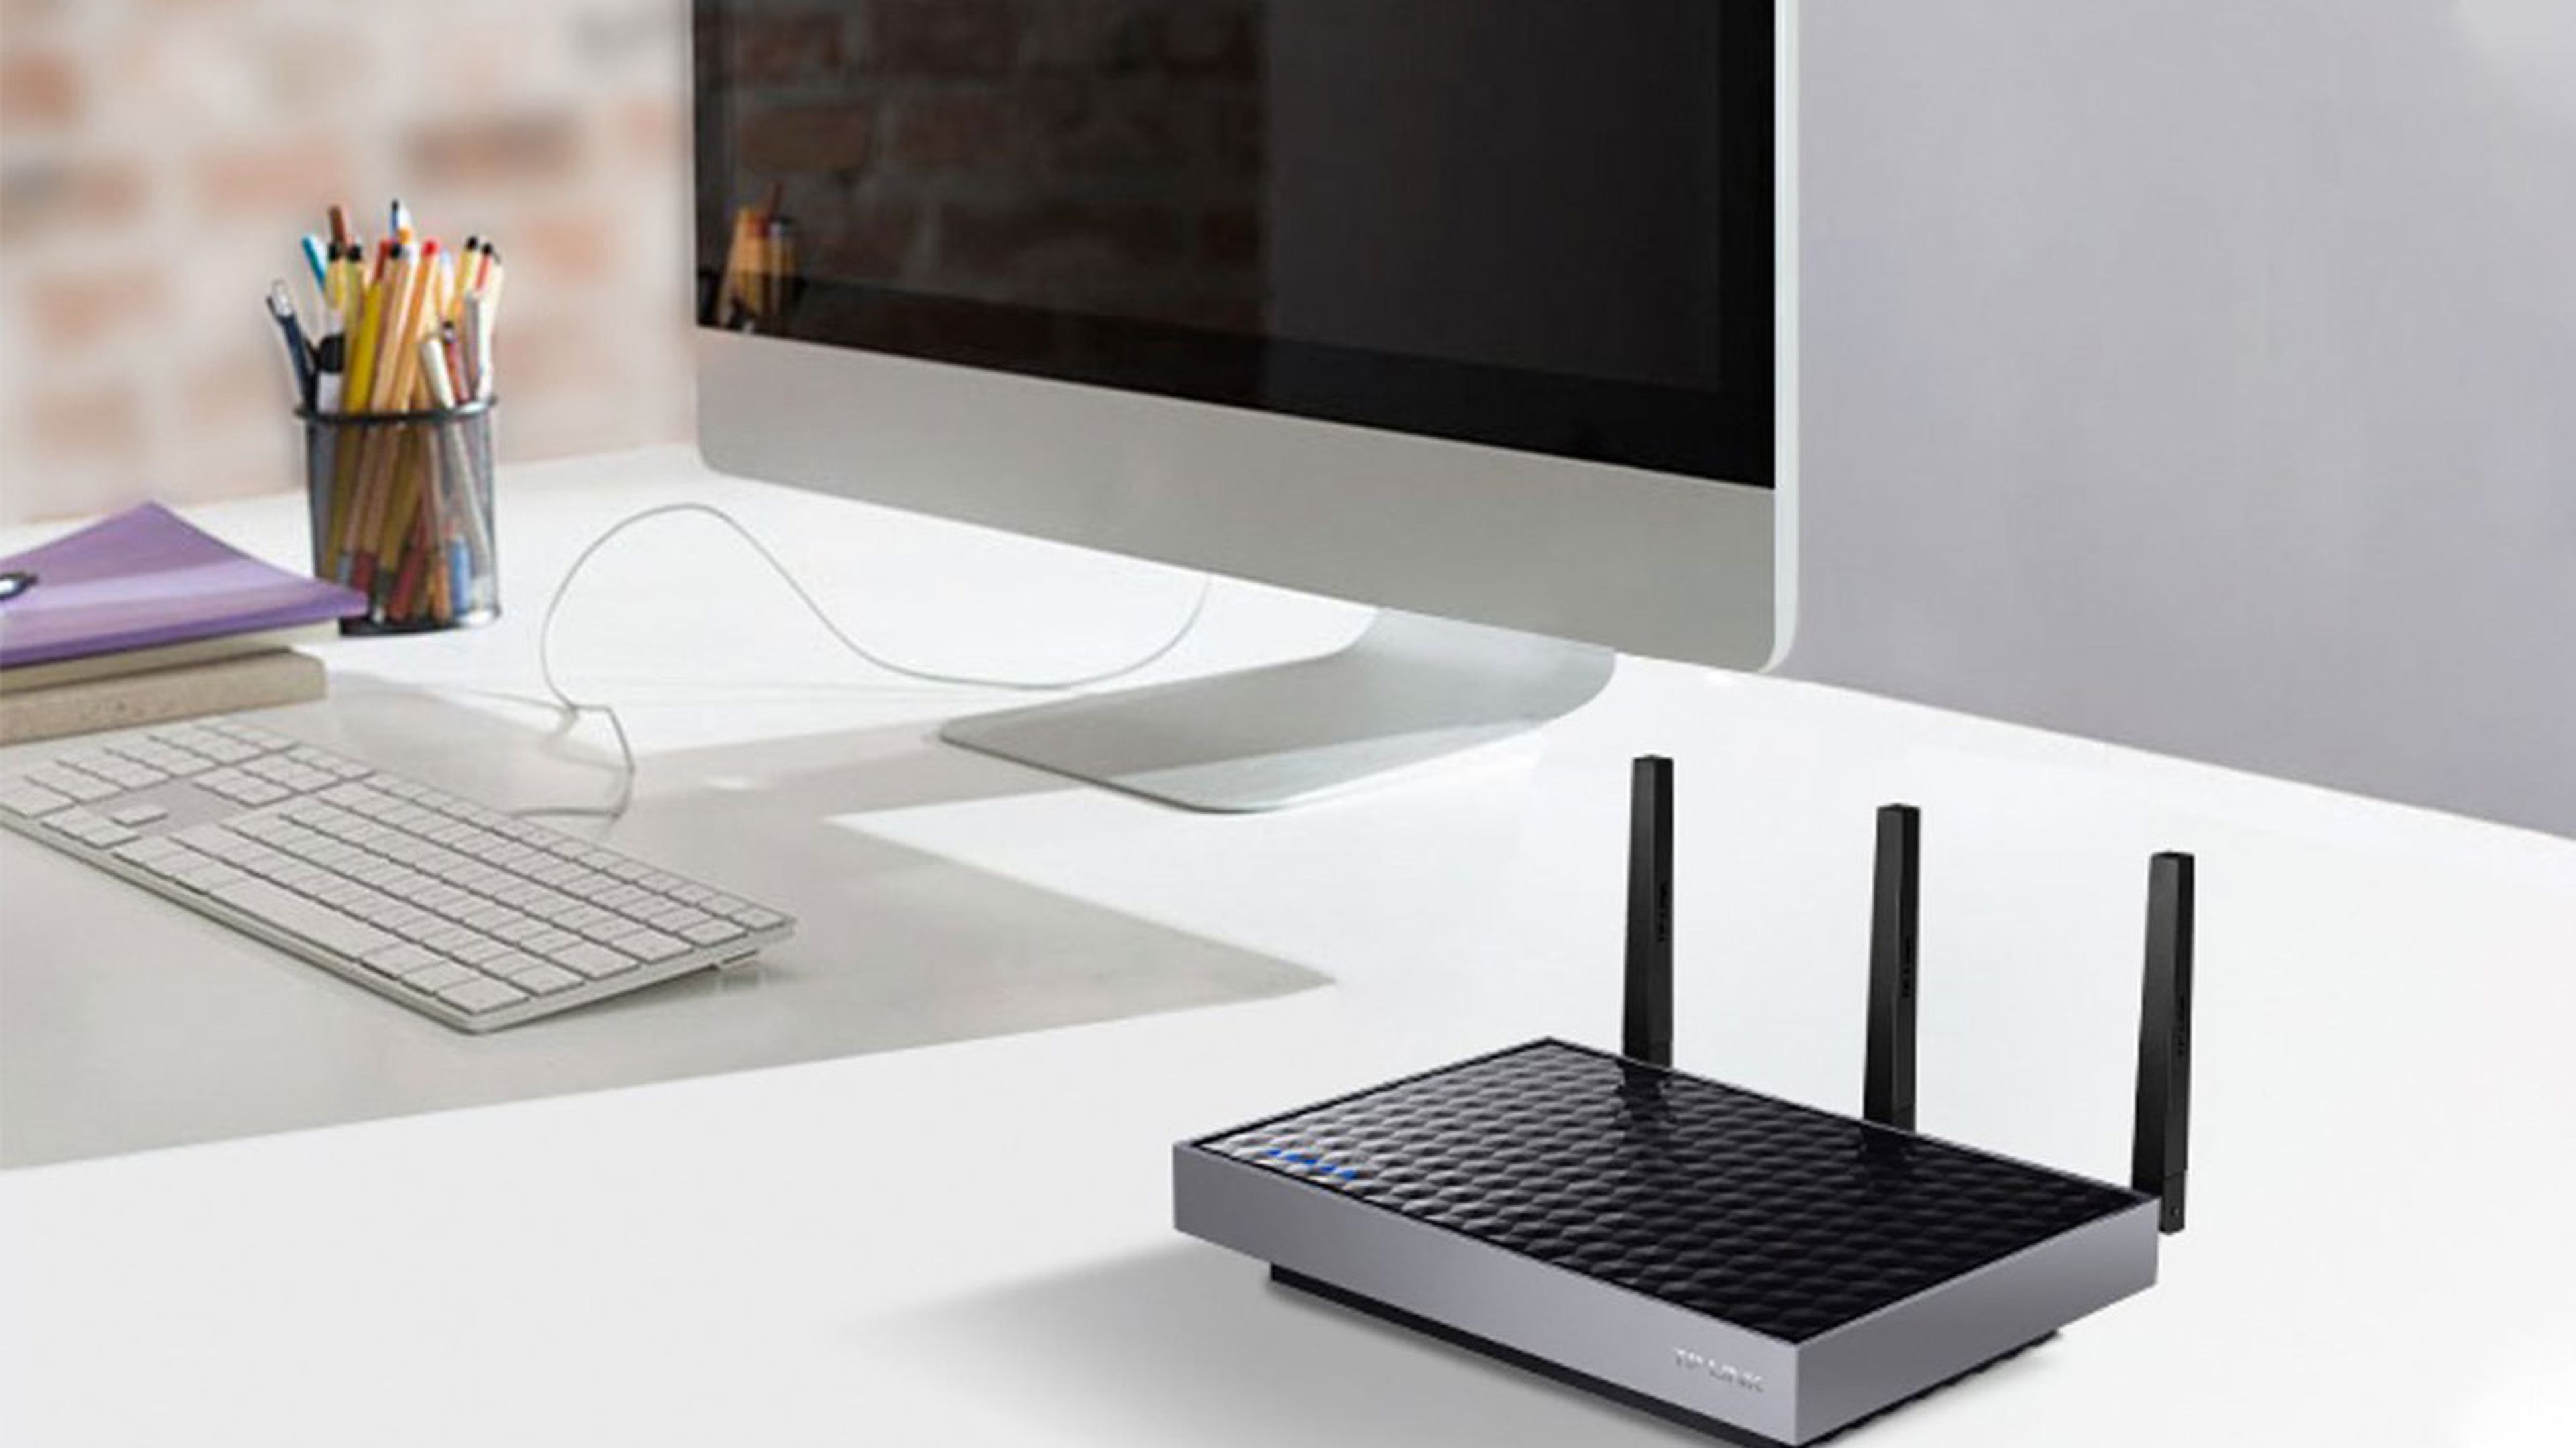 Types of WiFi repeater and which one to buy in 2019